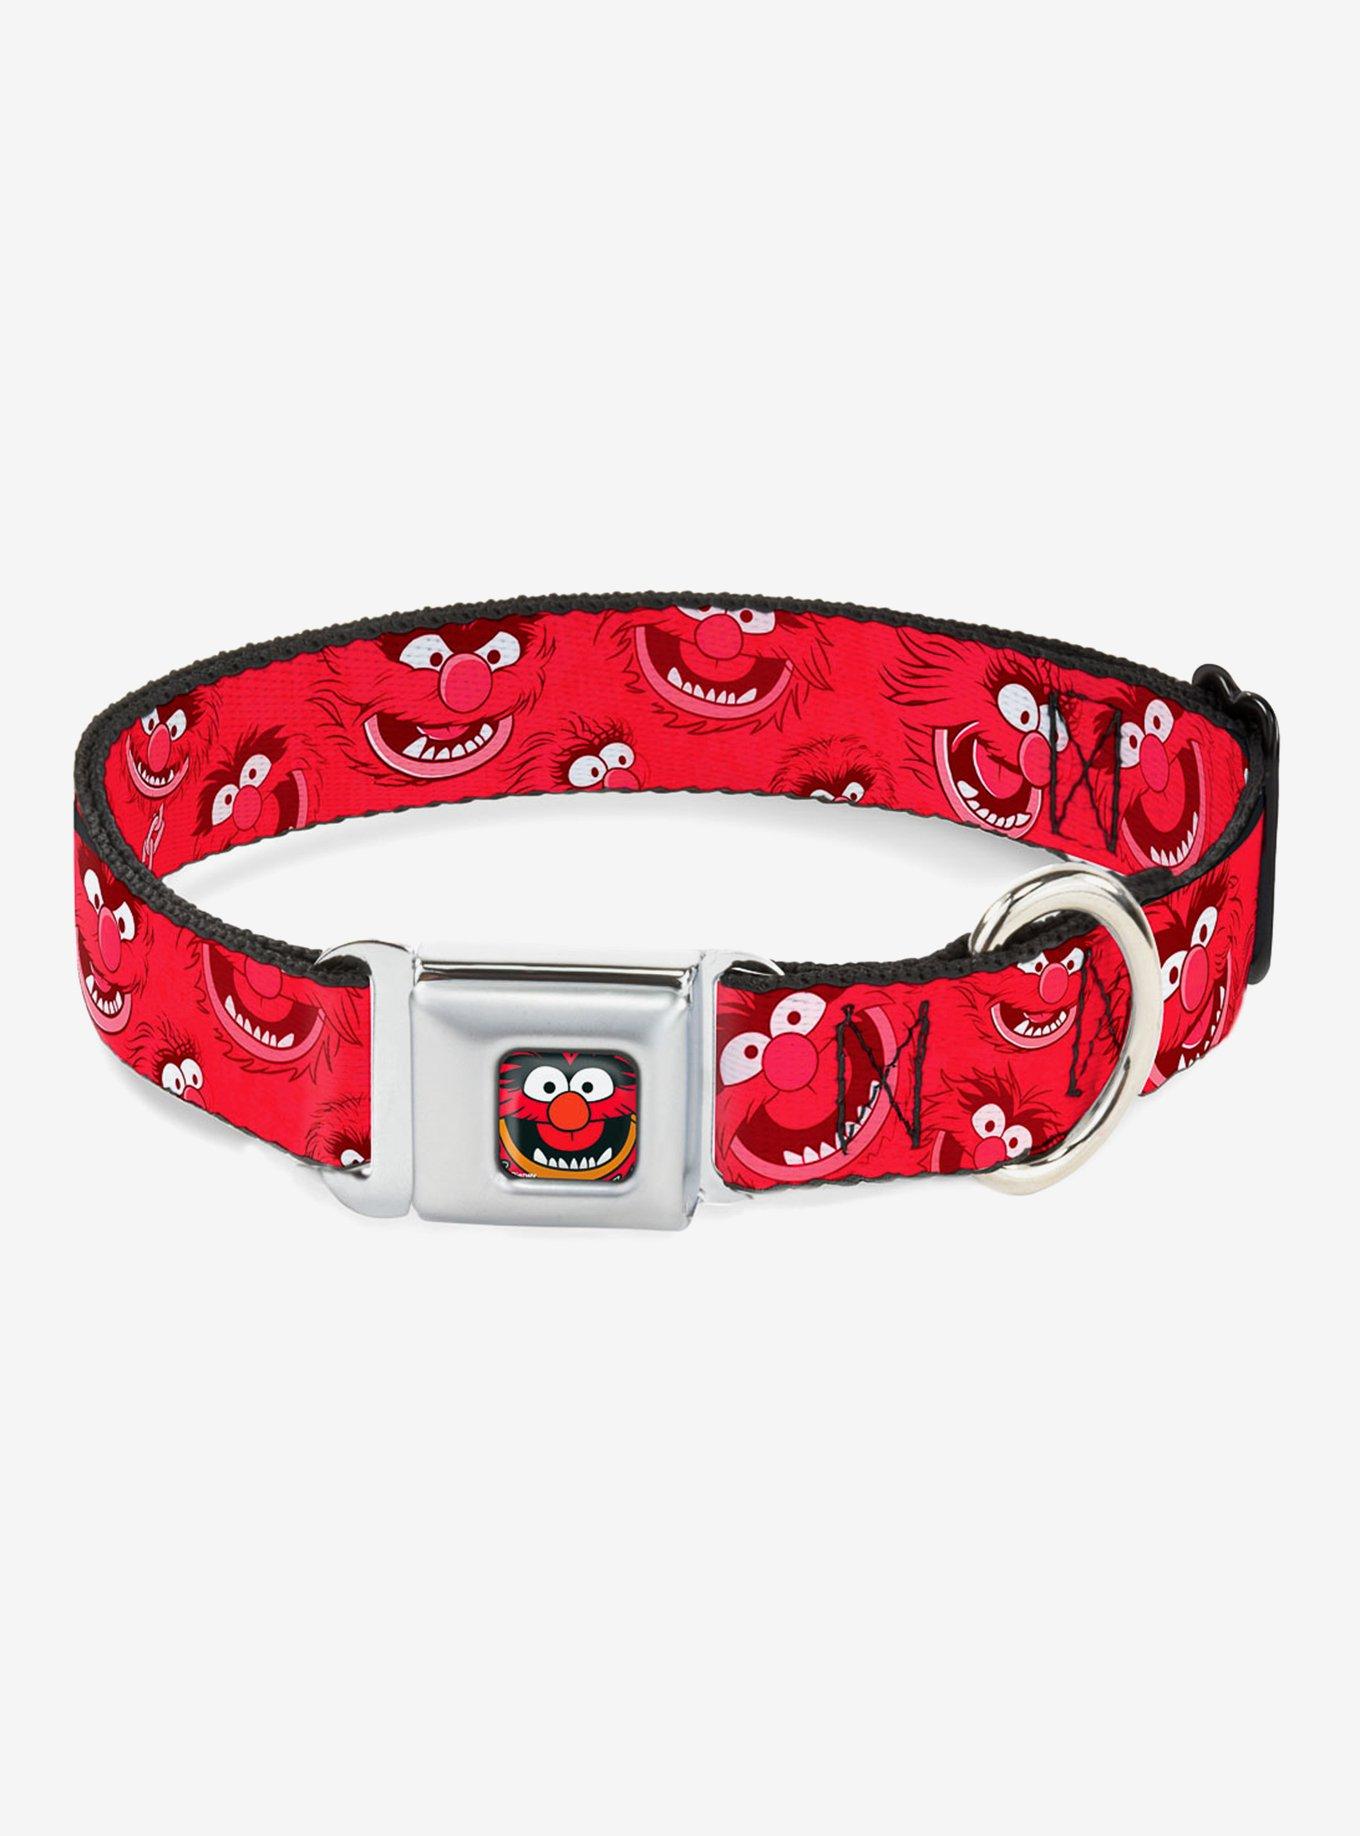 Disney The Muppets Animal Expressions Seatbelt Buckle Dog Collar, RED, hi-res